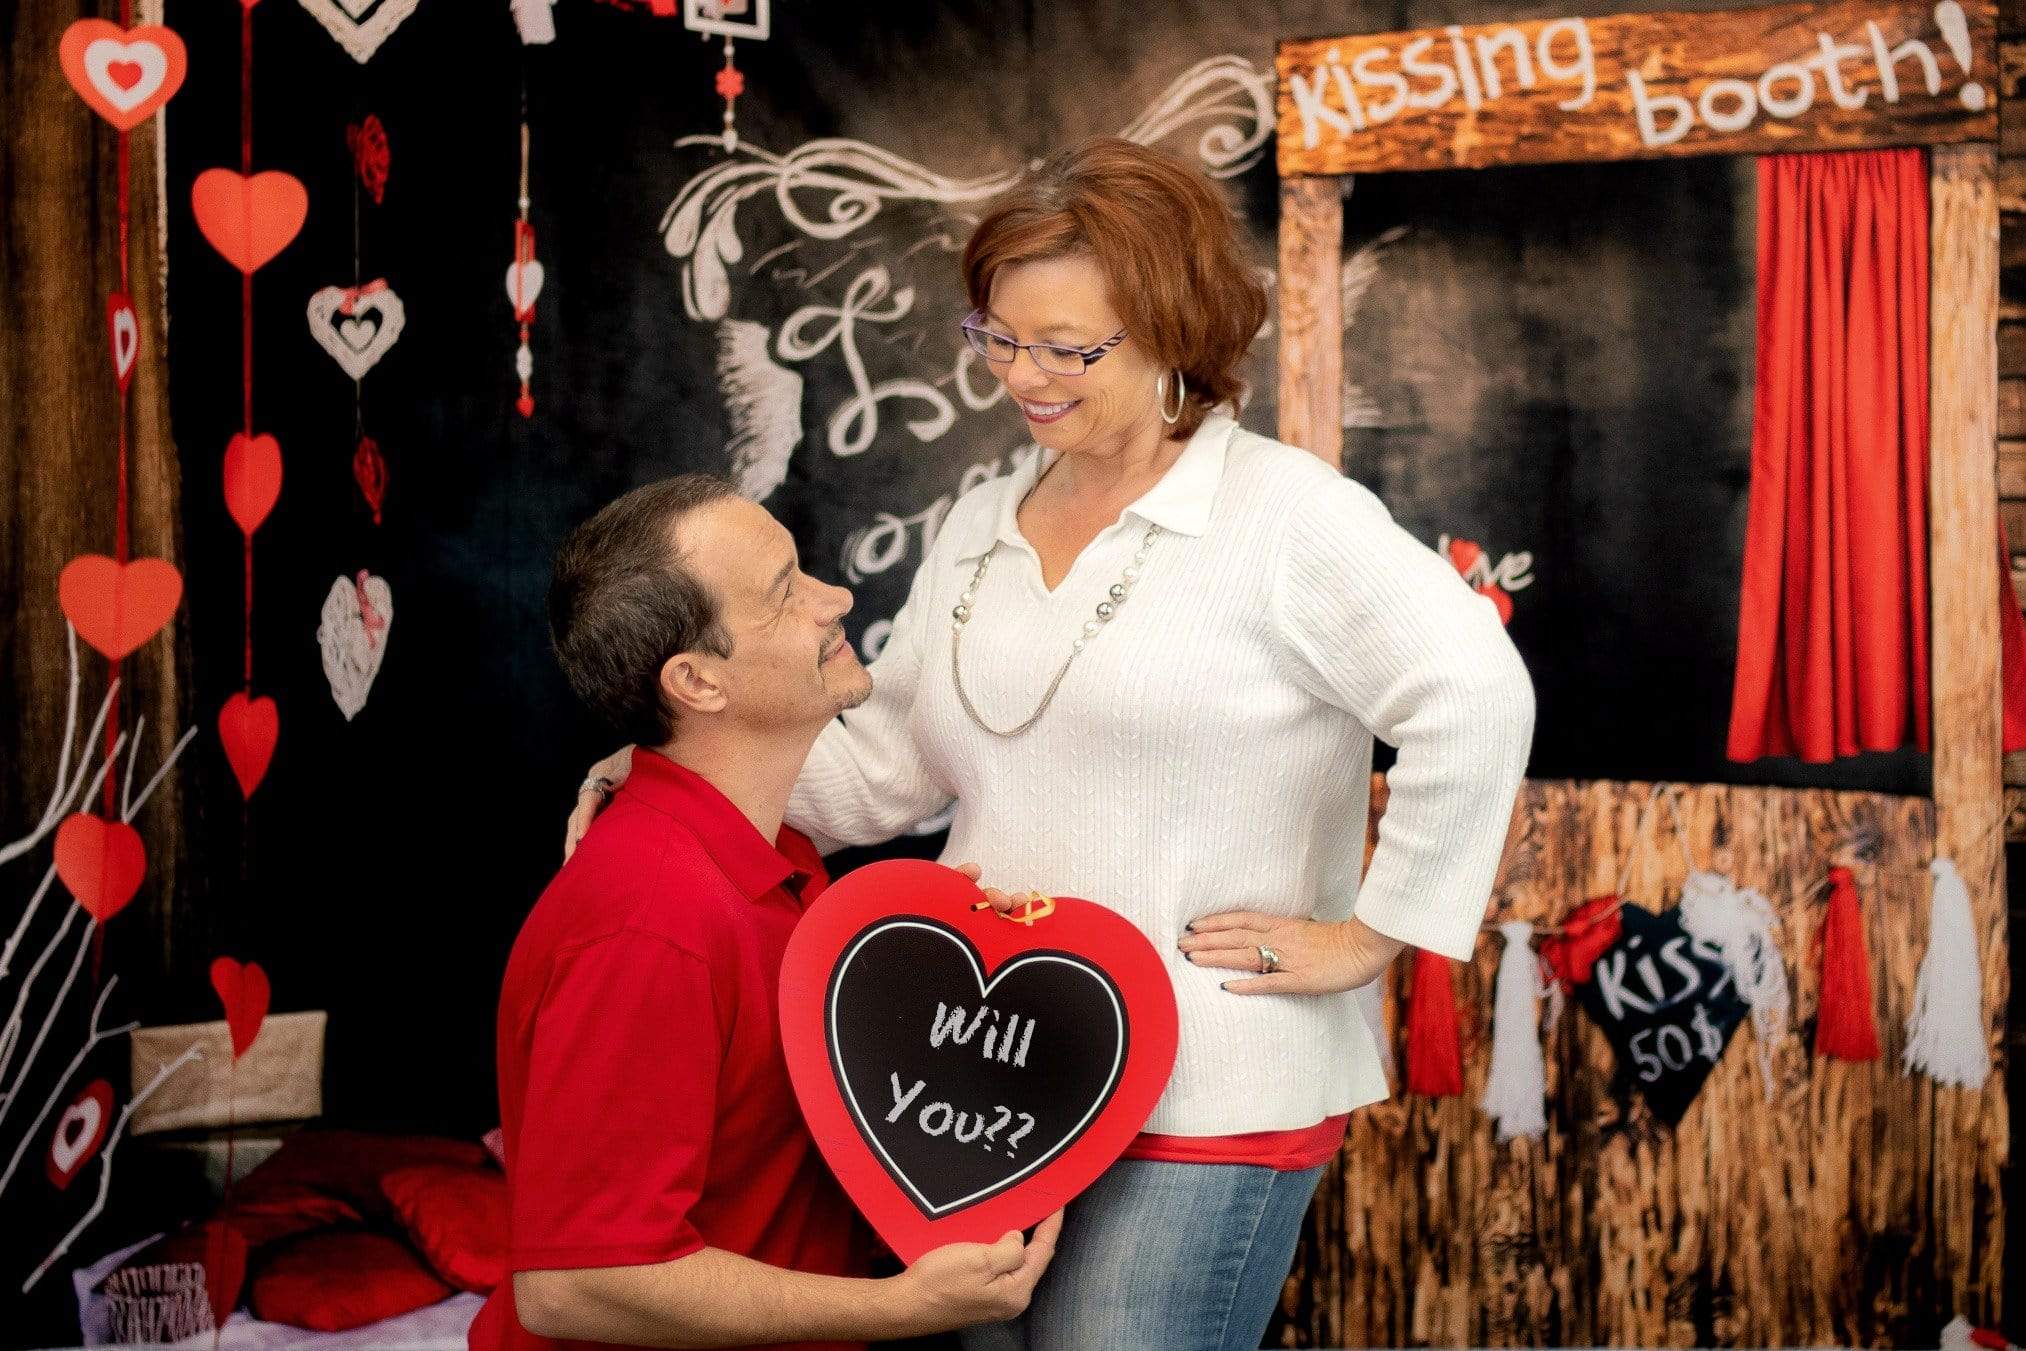 Kate Kiss Booth Valentines Backdrop for Photography